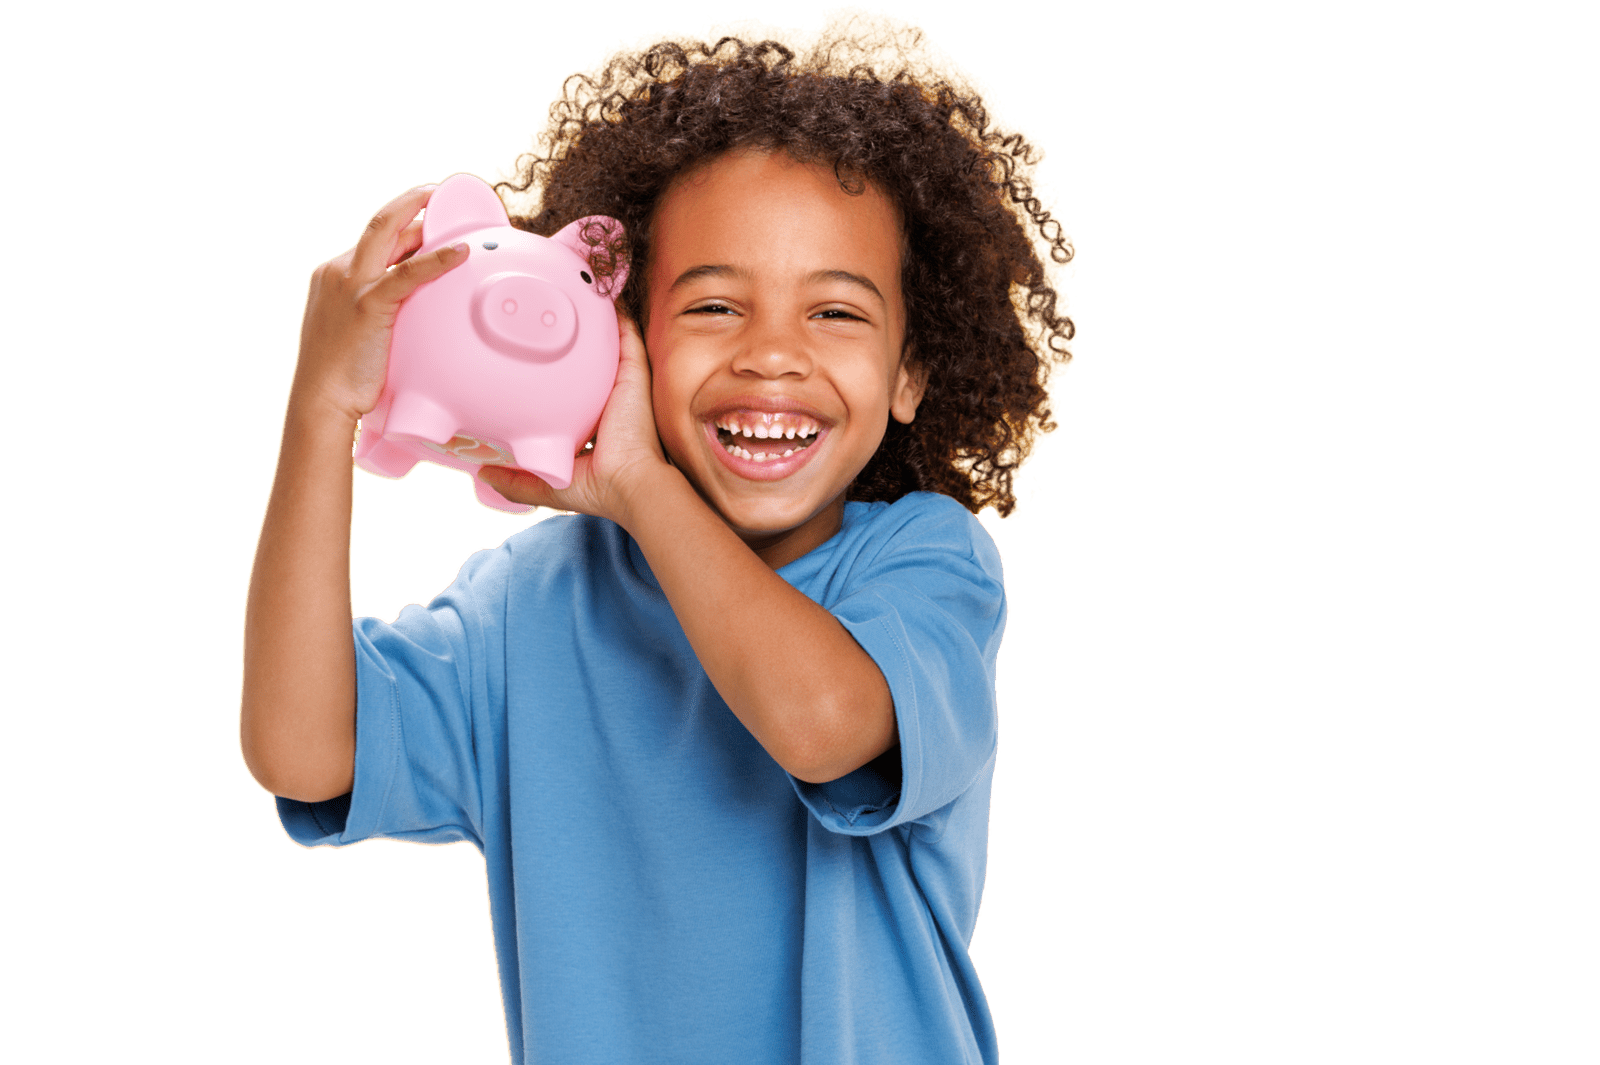 Young boy smiling and holding a piggy bank